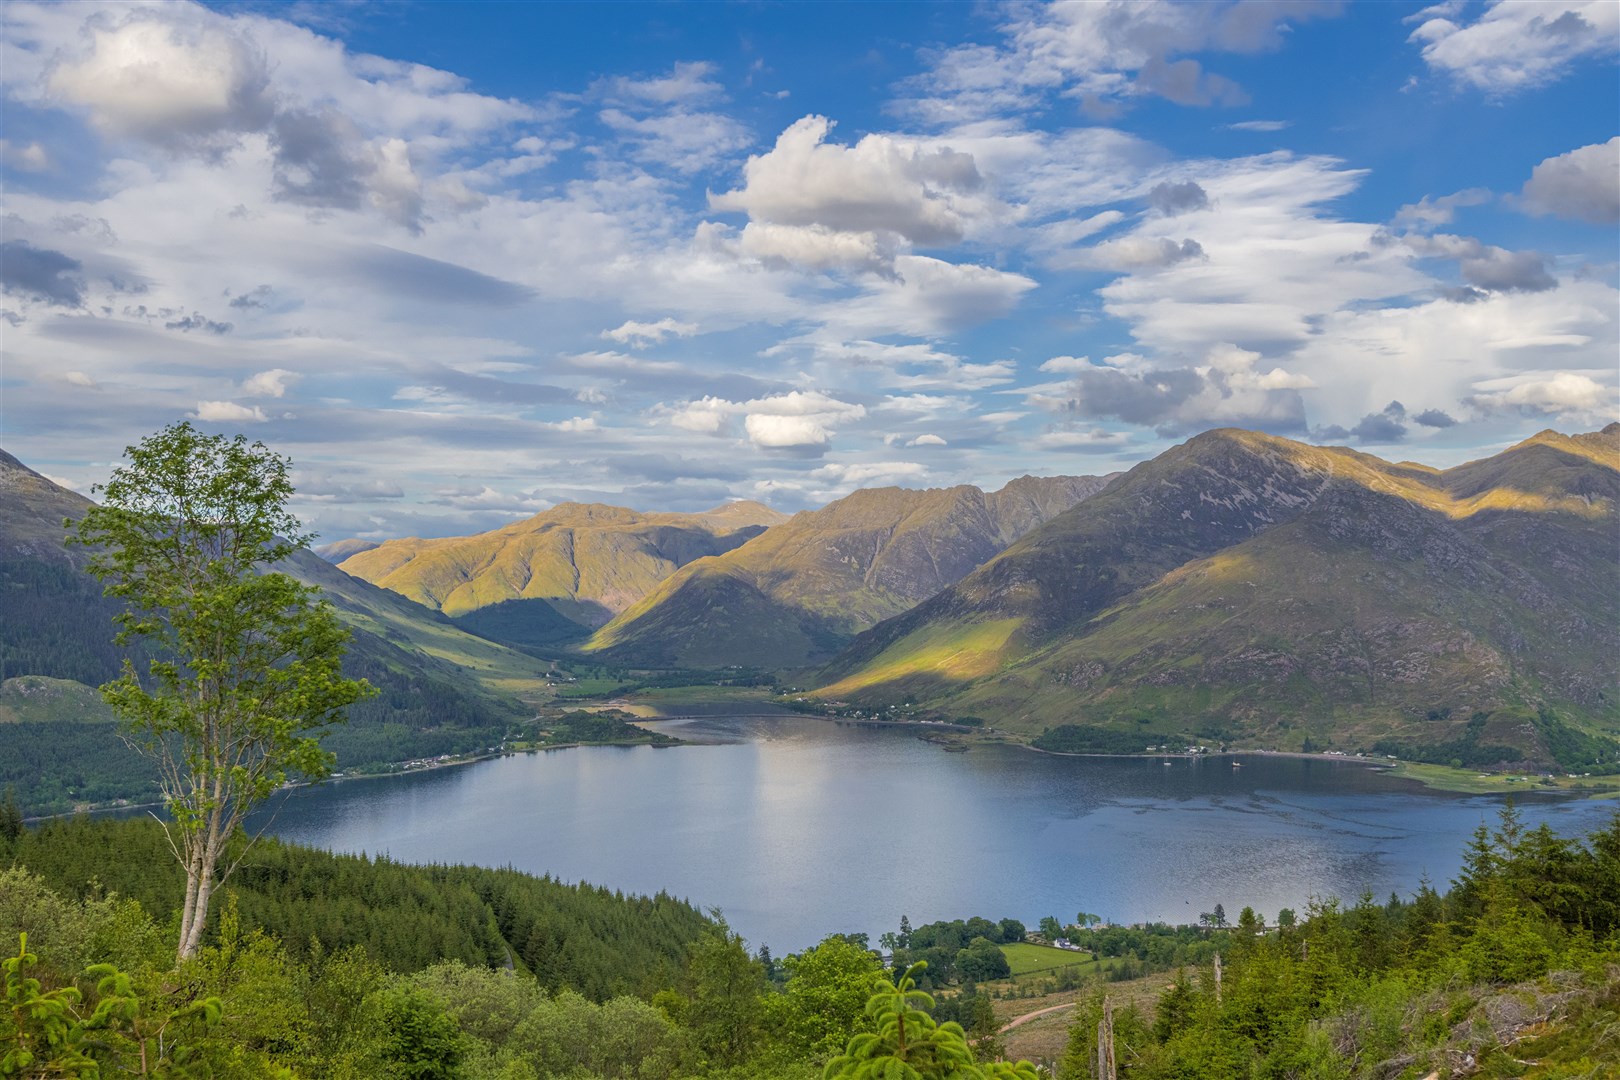 Kintail is an area of mountains in the Wester Ross Biosphere. Exceptional and remote mountain scenery with lochs, glens and the magnificent ridge of the Five Sisters. Credit: VisitScotland / Airborne Lens.